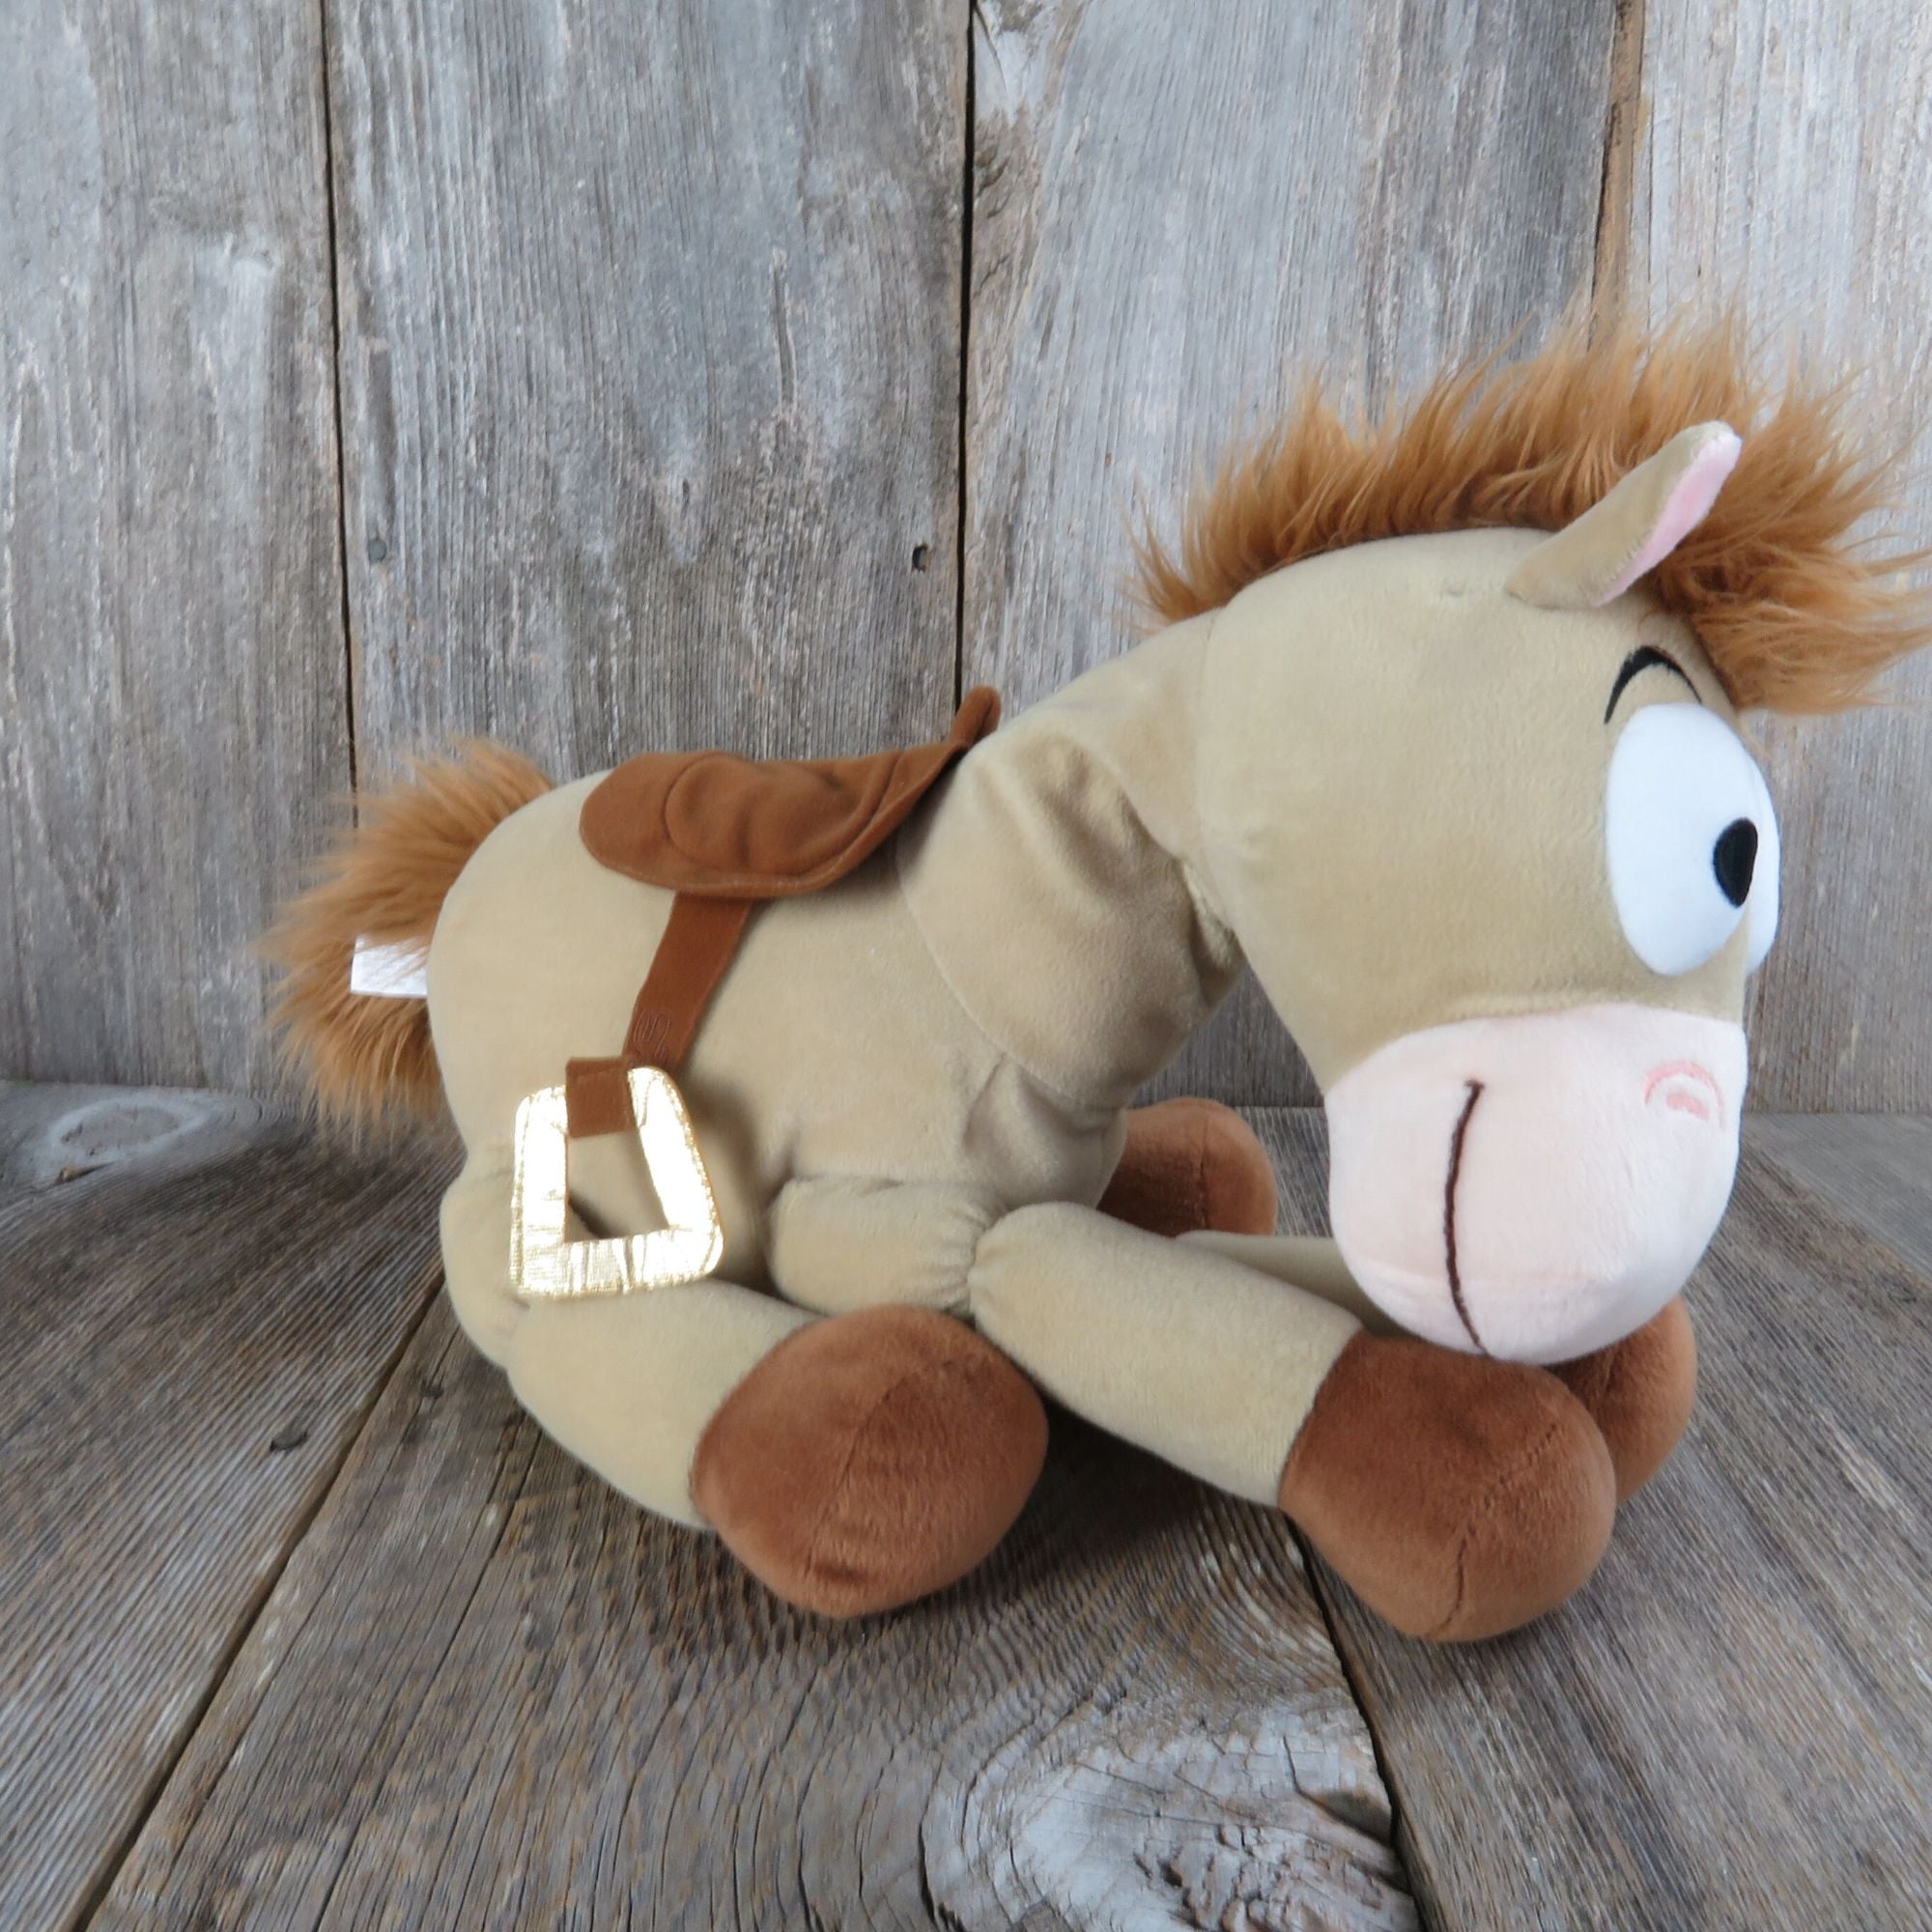 Who is Bullseye, the horse from Toy Story? - Horse & Hound